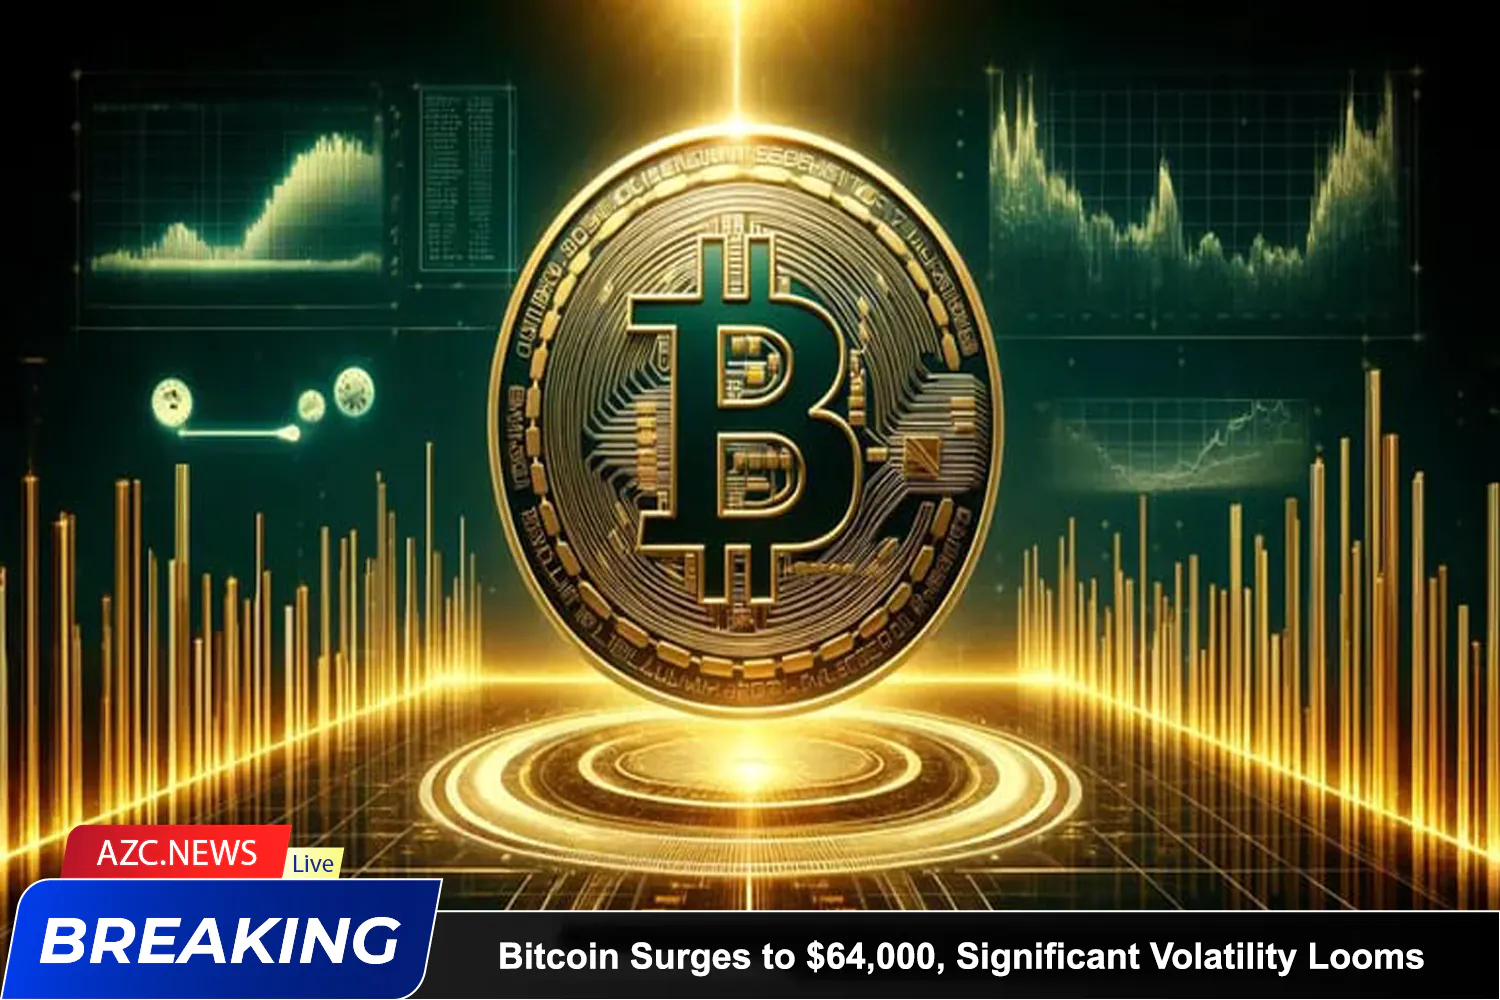 Azcnews Bitcoin Surges To $64,000, Significant Volatility Looms